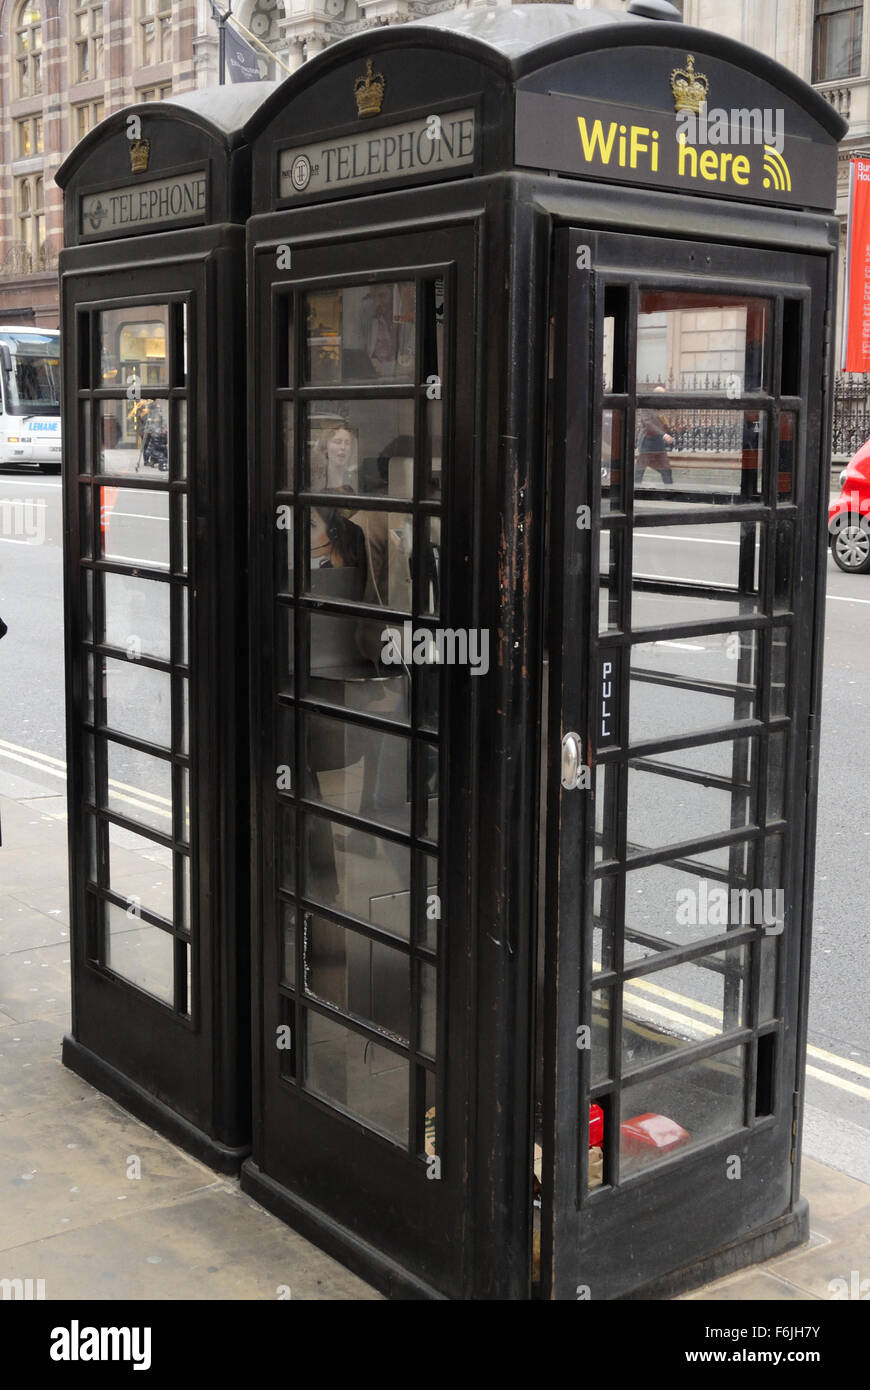 Black telephone boxes offering Wi-Fi - Piccadilly, London, England UK - 2015 Stock Photo